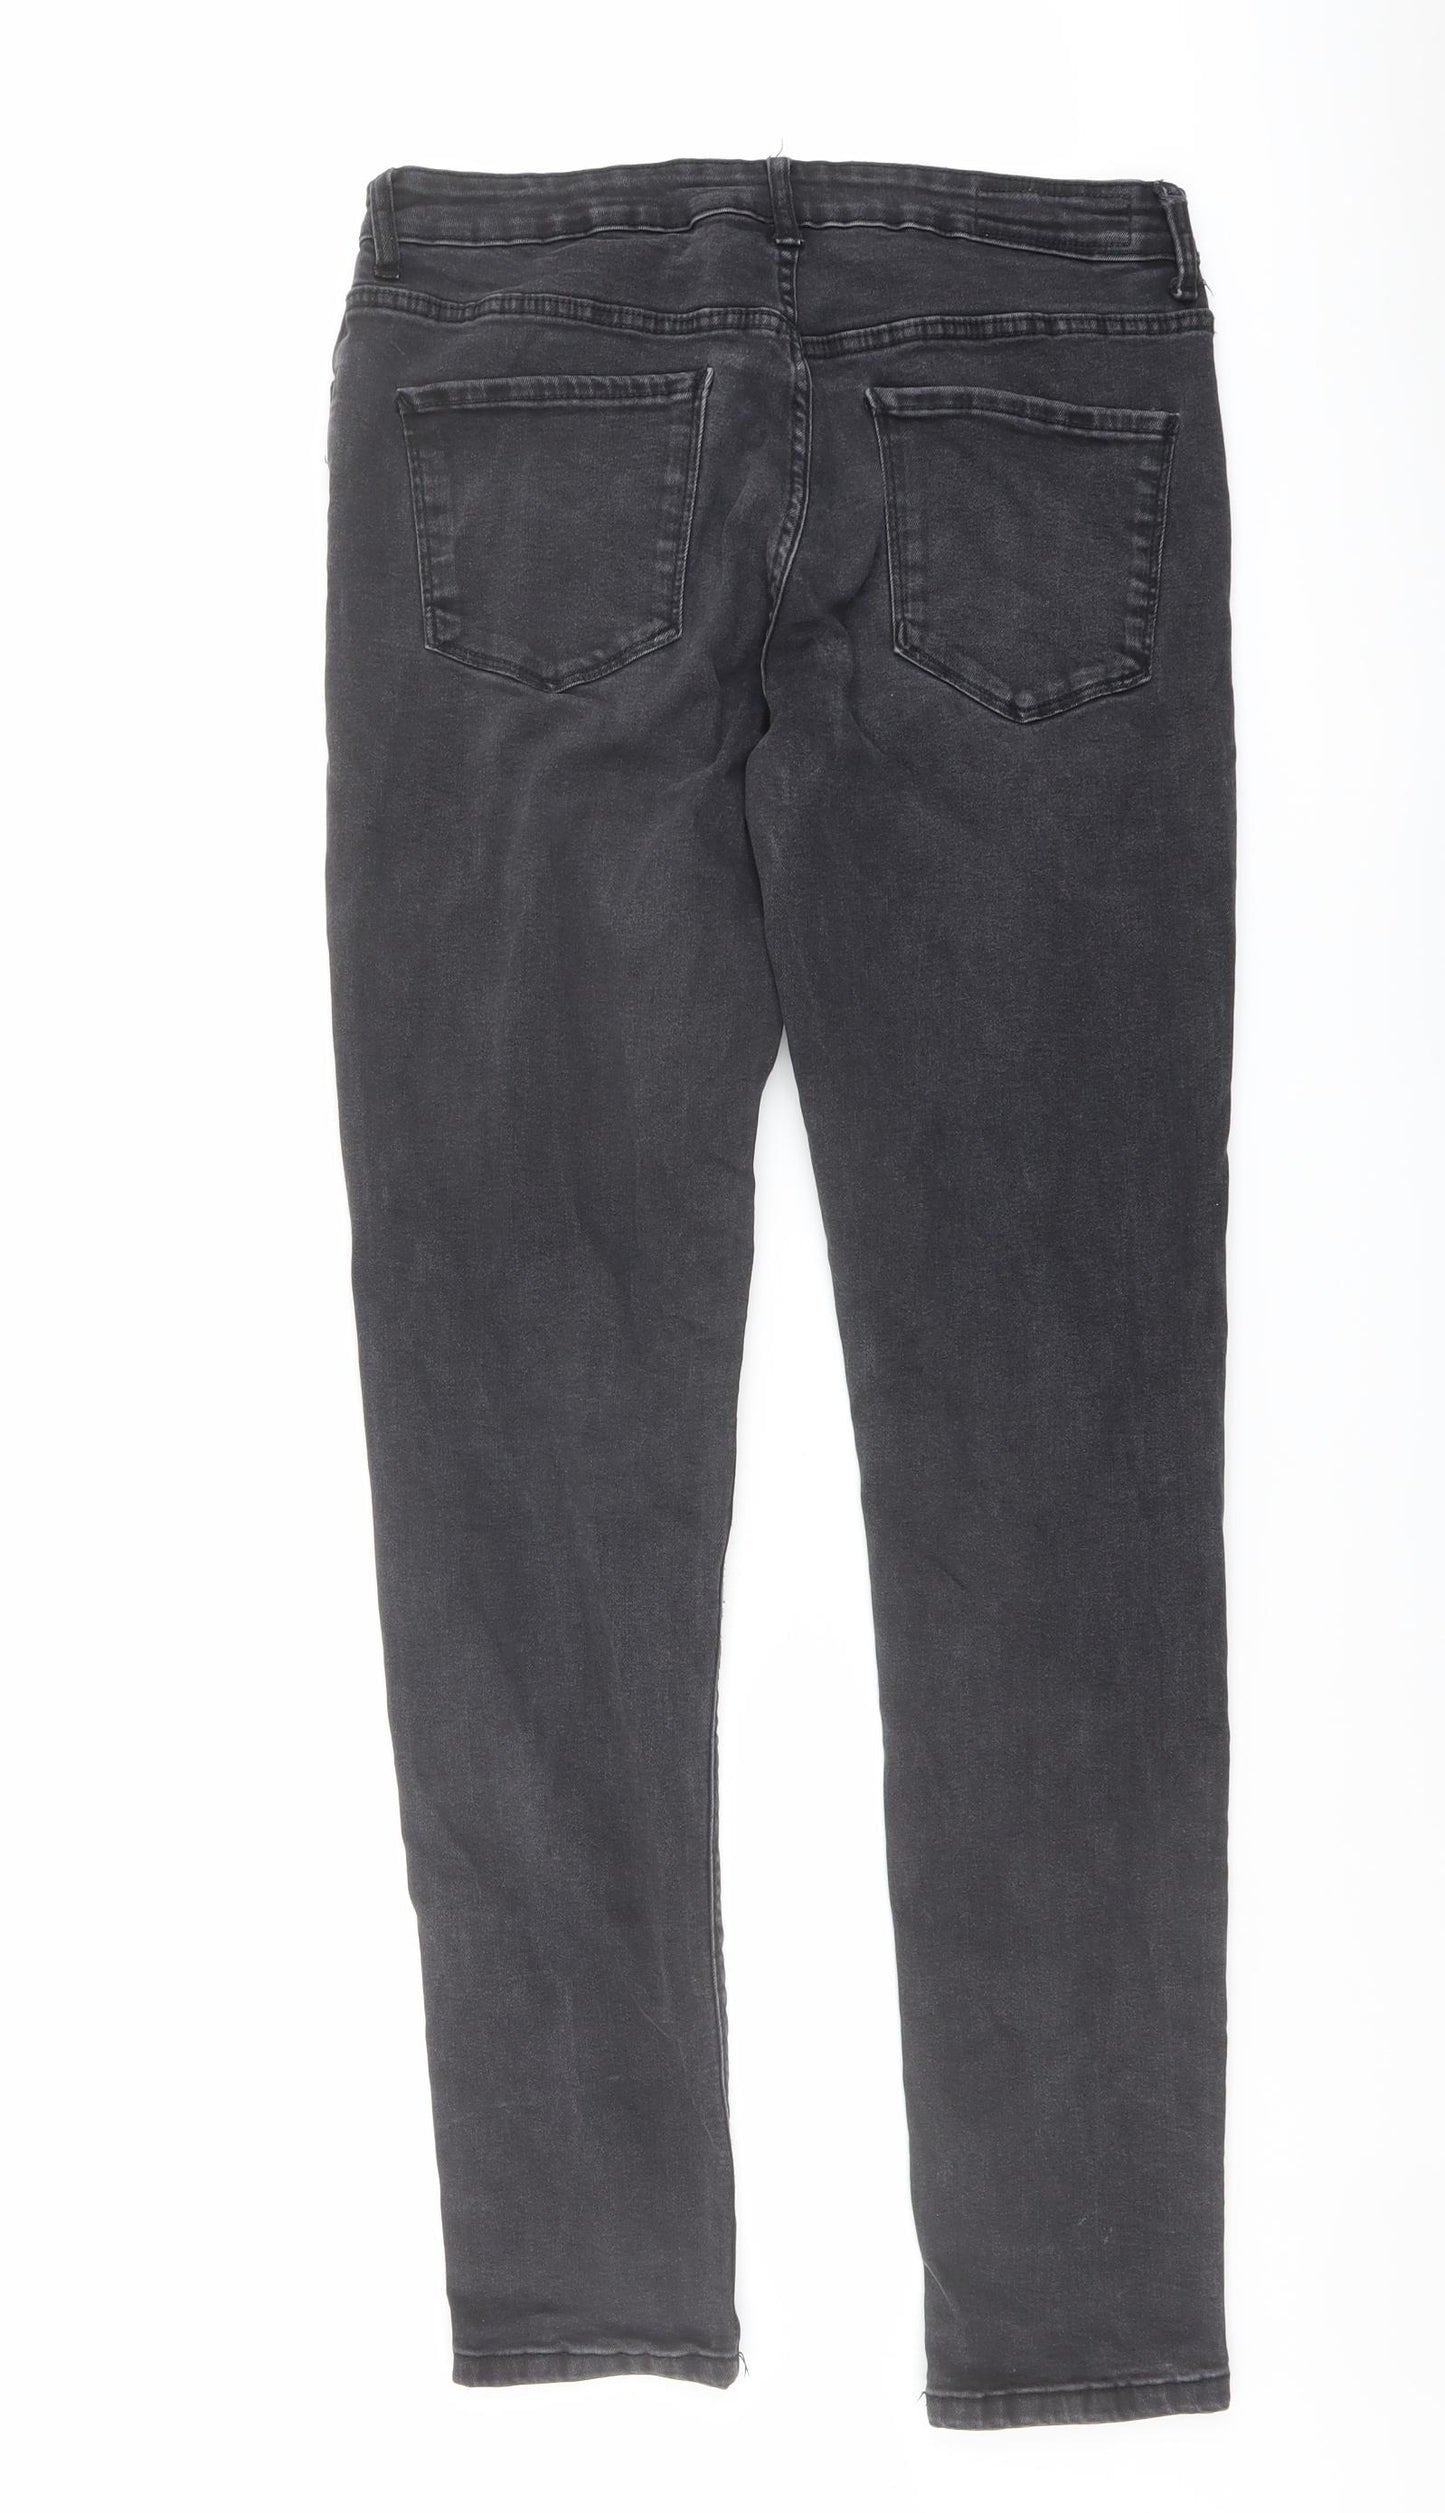 Denim & Co. Mens Grey Cotton Skinny Jeans Size 34 in L34 in Regular Button